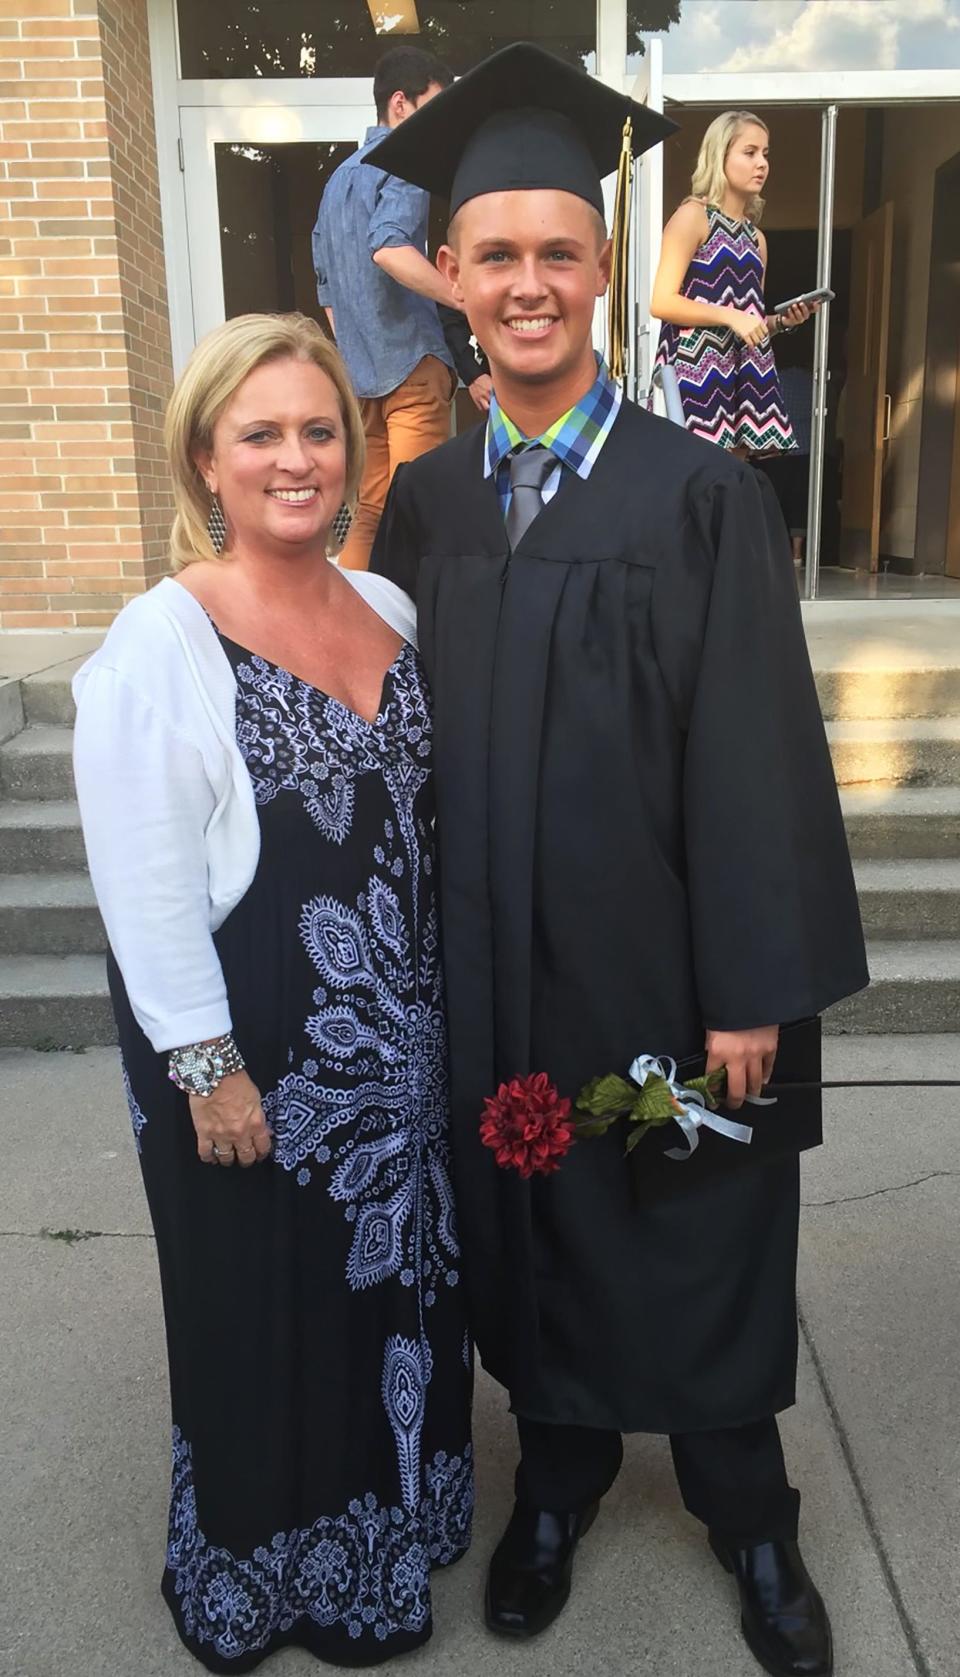 18-year-old Colton Wright stands next his mom, Amy Thompson, following his high school graduation in May 2016.